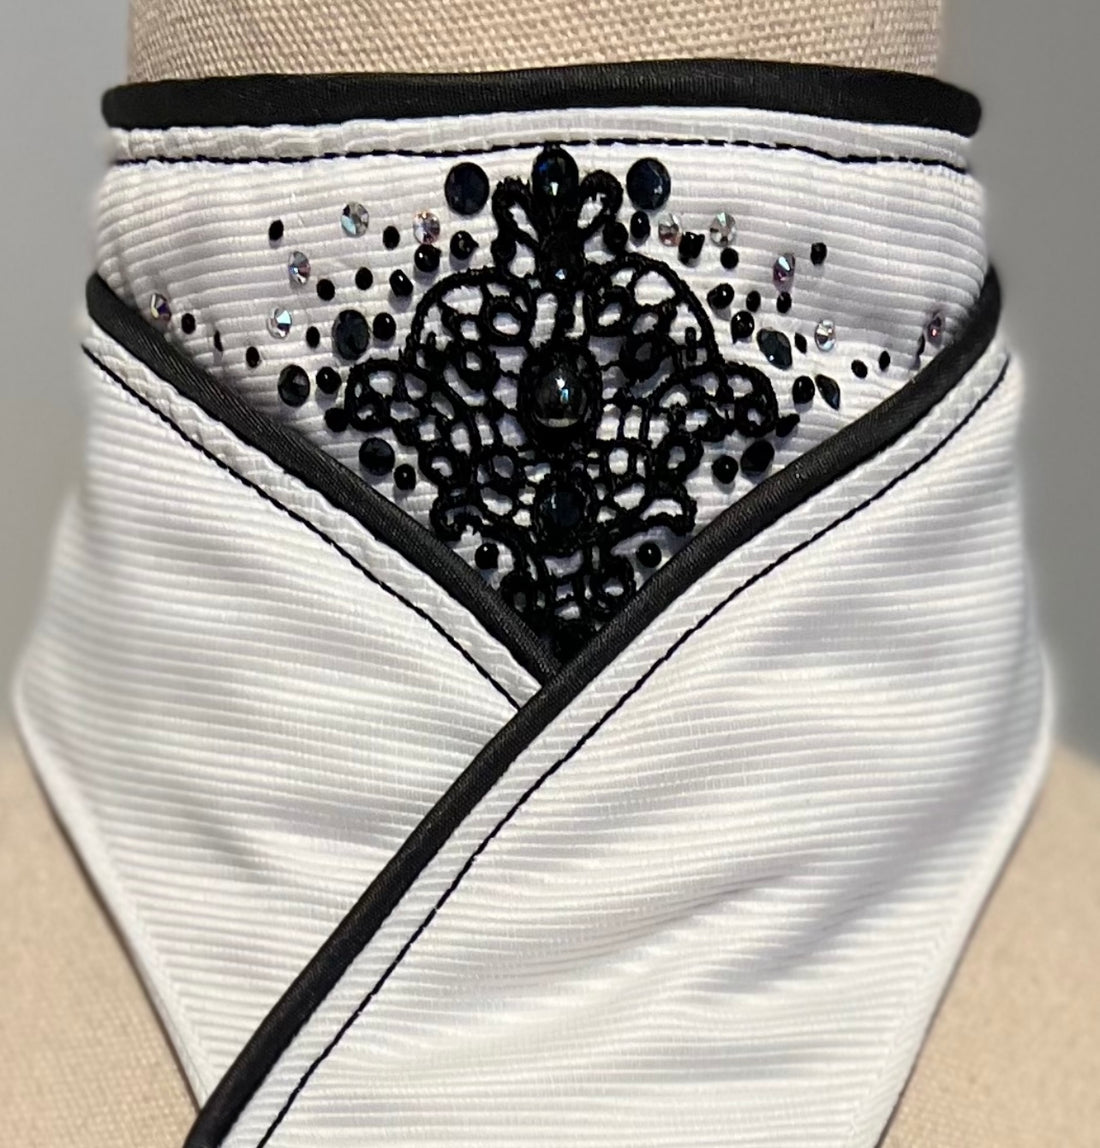 A stylish Crossover Stock with Black piping and a lace insert piece feature at the neck.#5